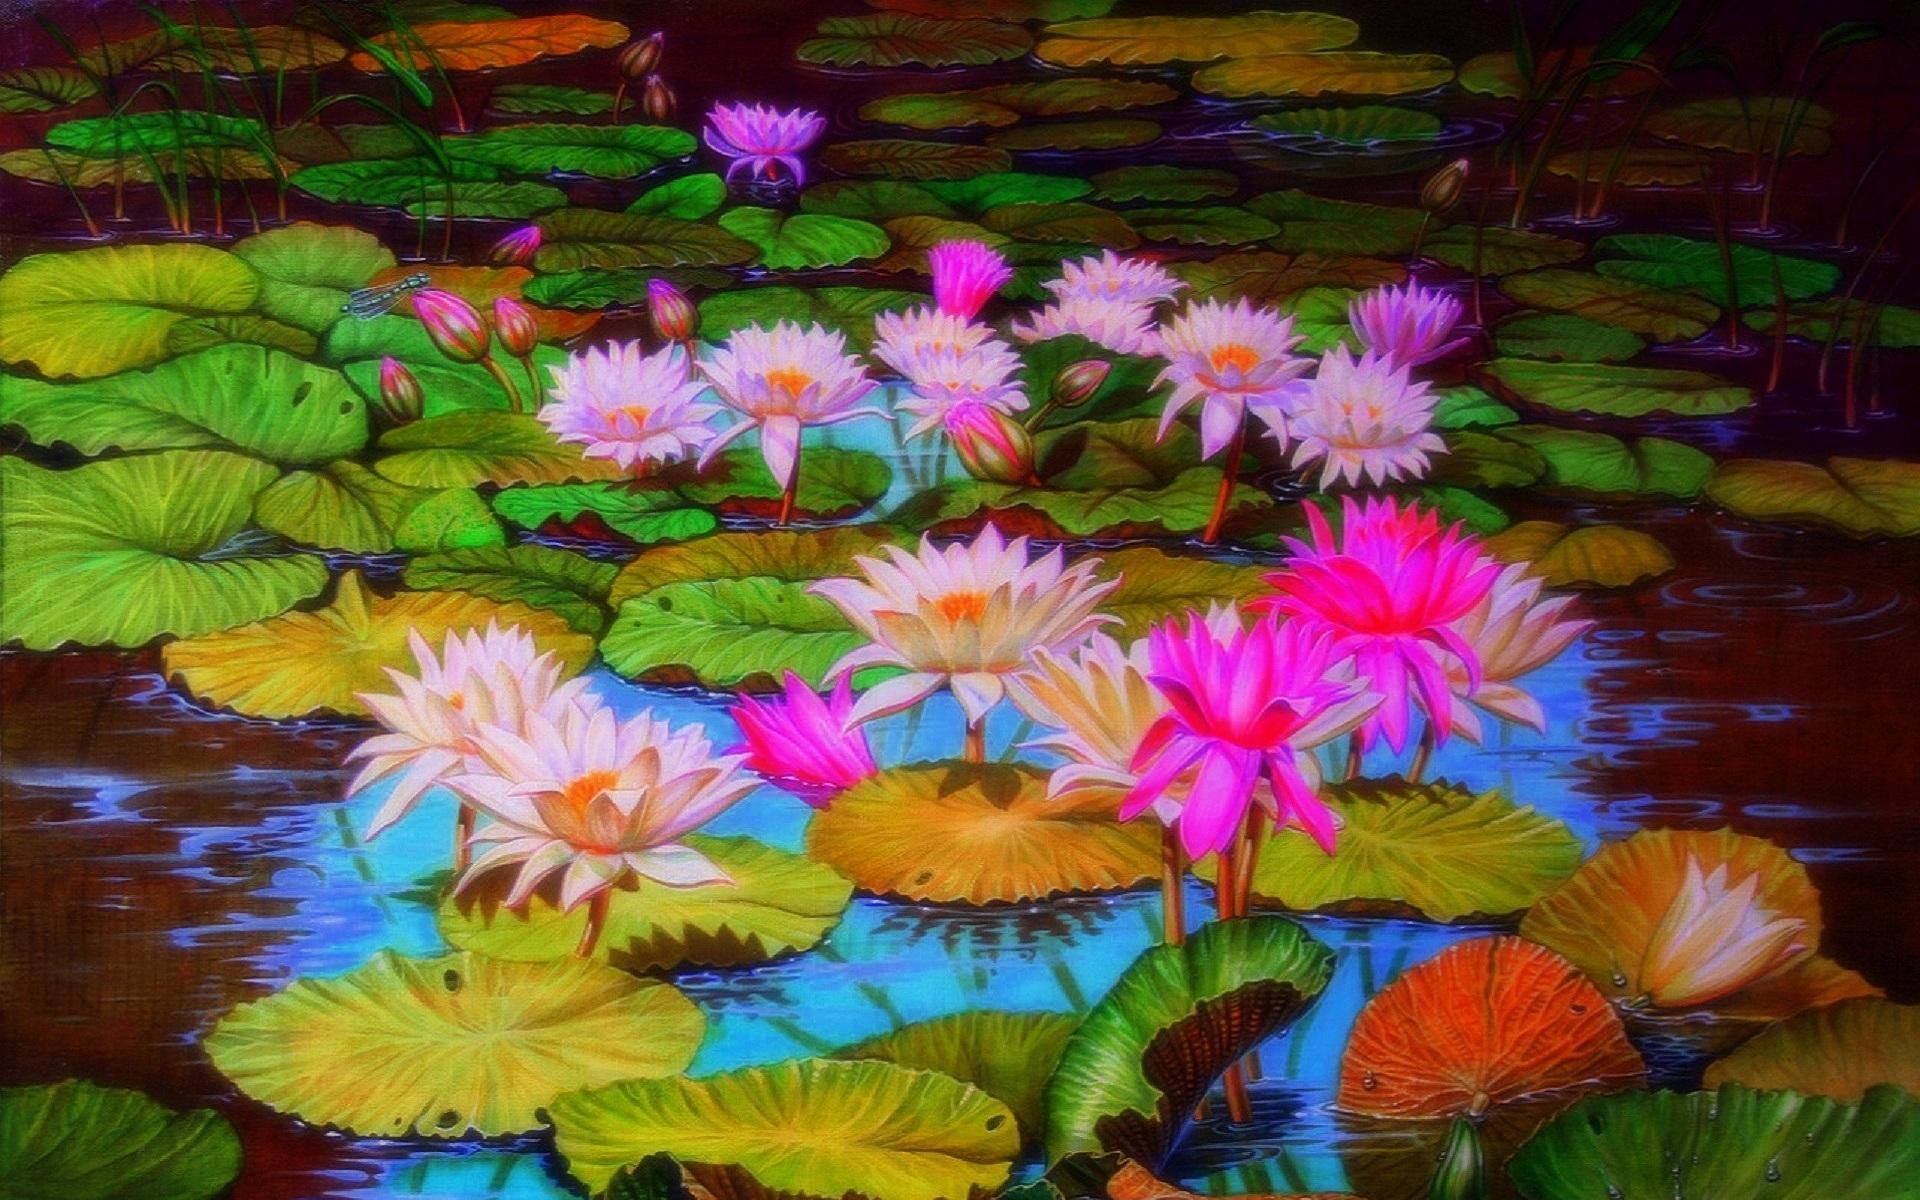 Earth Pond Flower Lotus Lily Pad Dragonfly 1920x1200